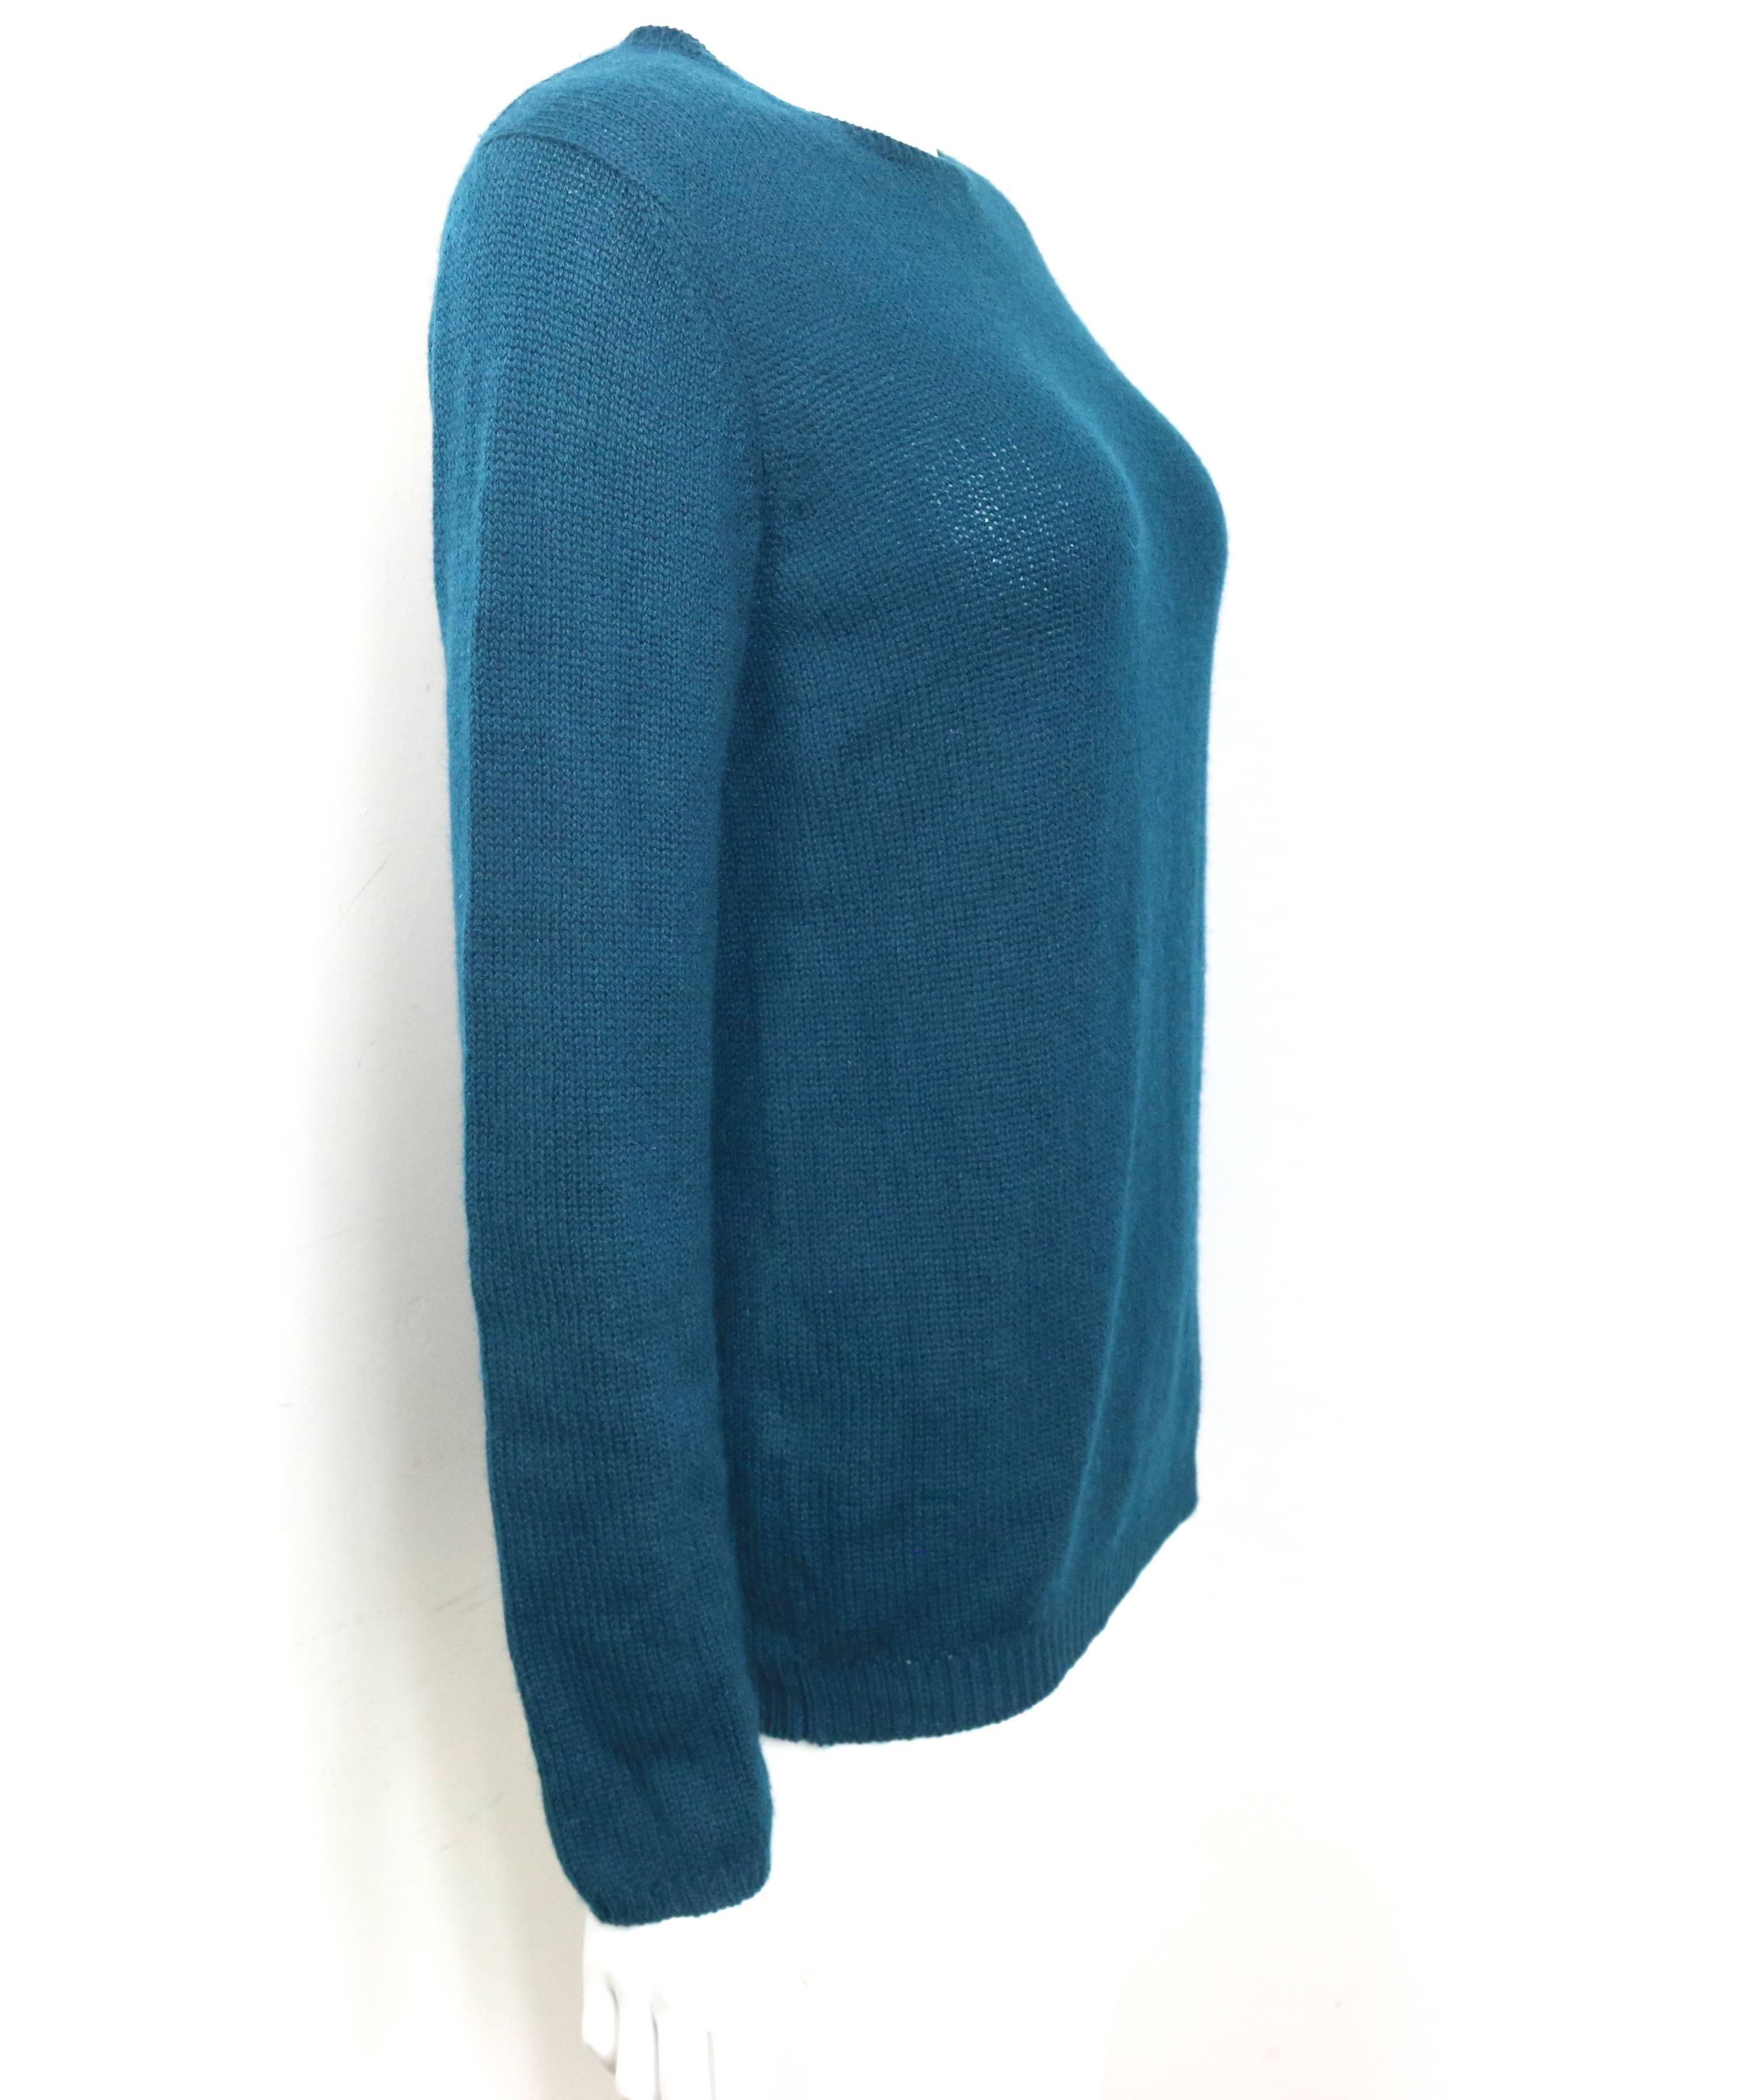 - Vintage 90s Prada teal cashmere pulllover sweater. 

- Size 46. 

- 100% Cashmere